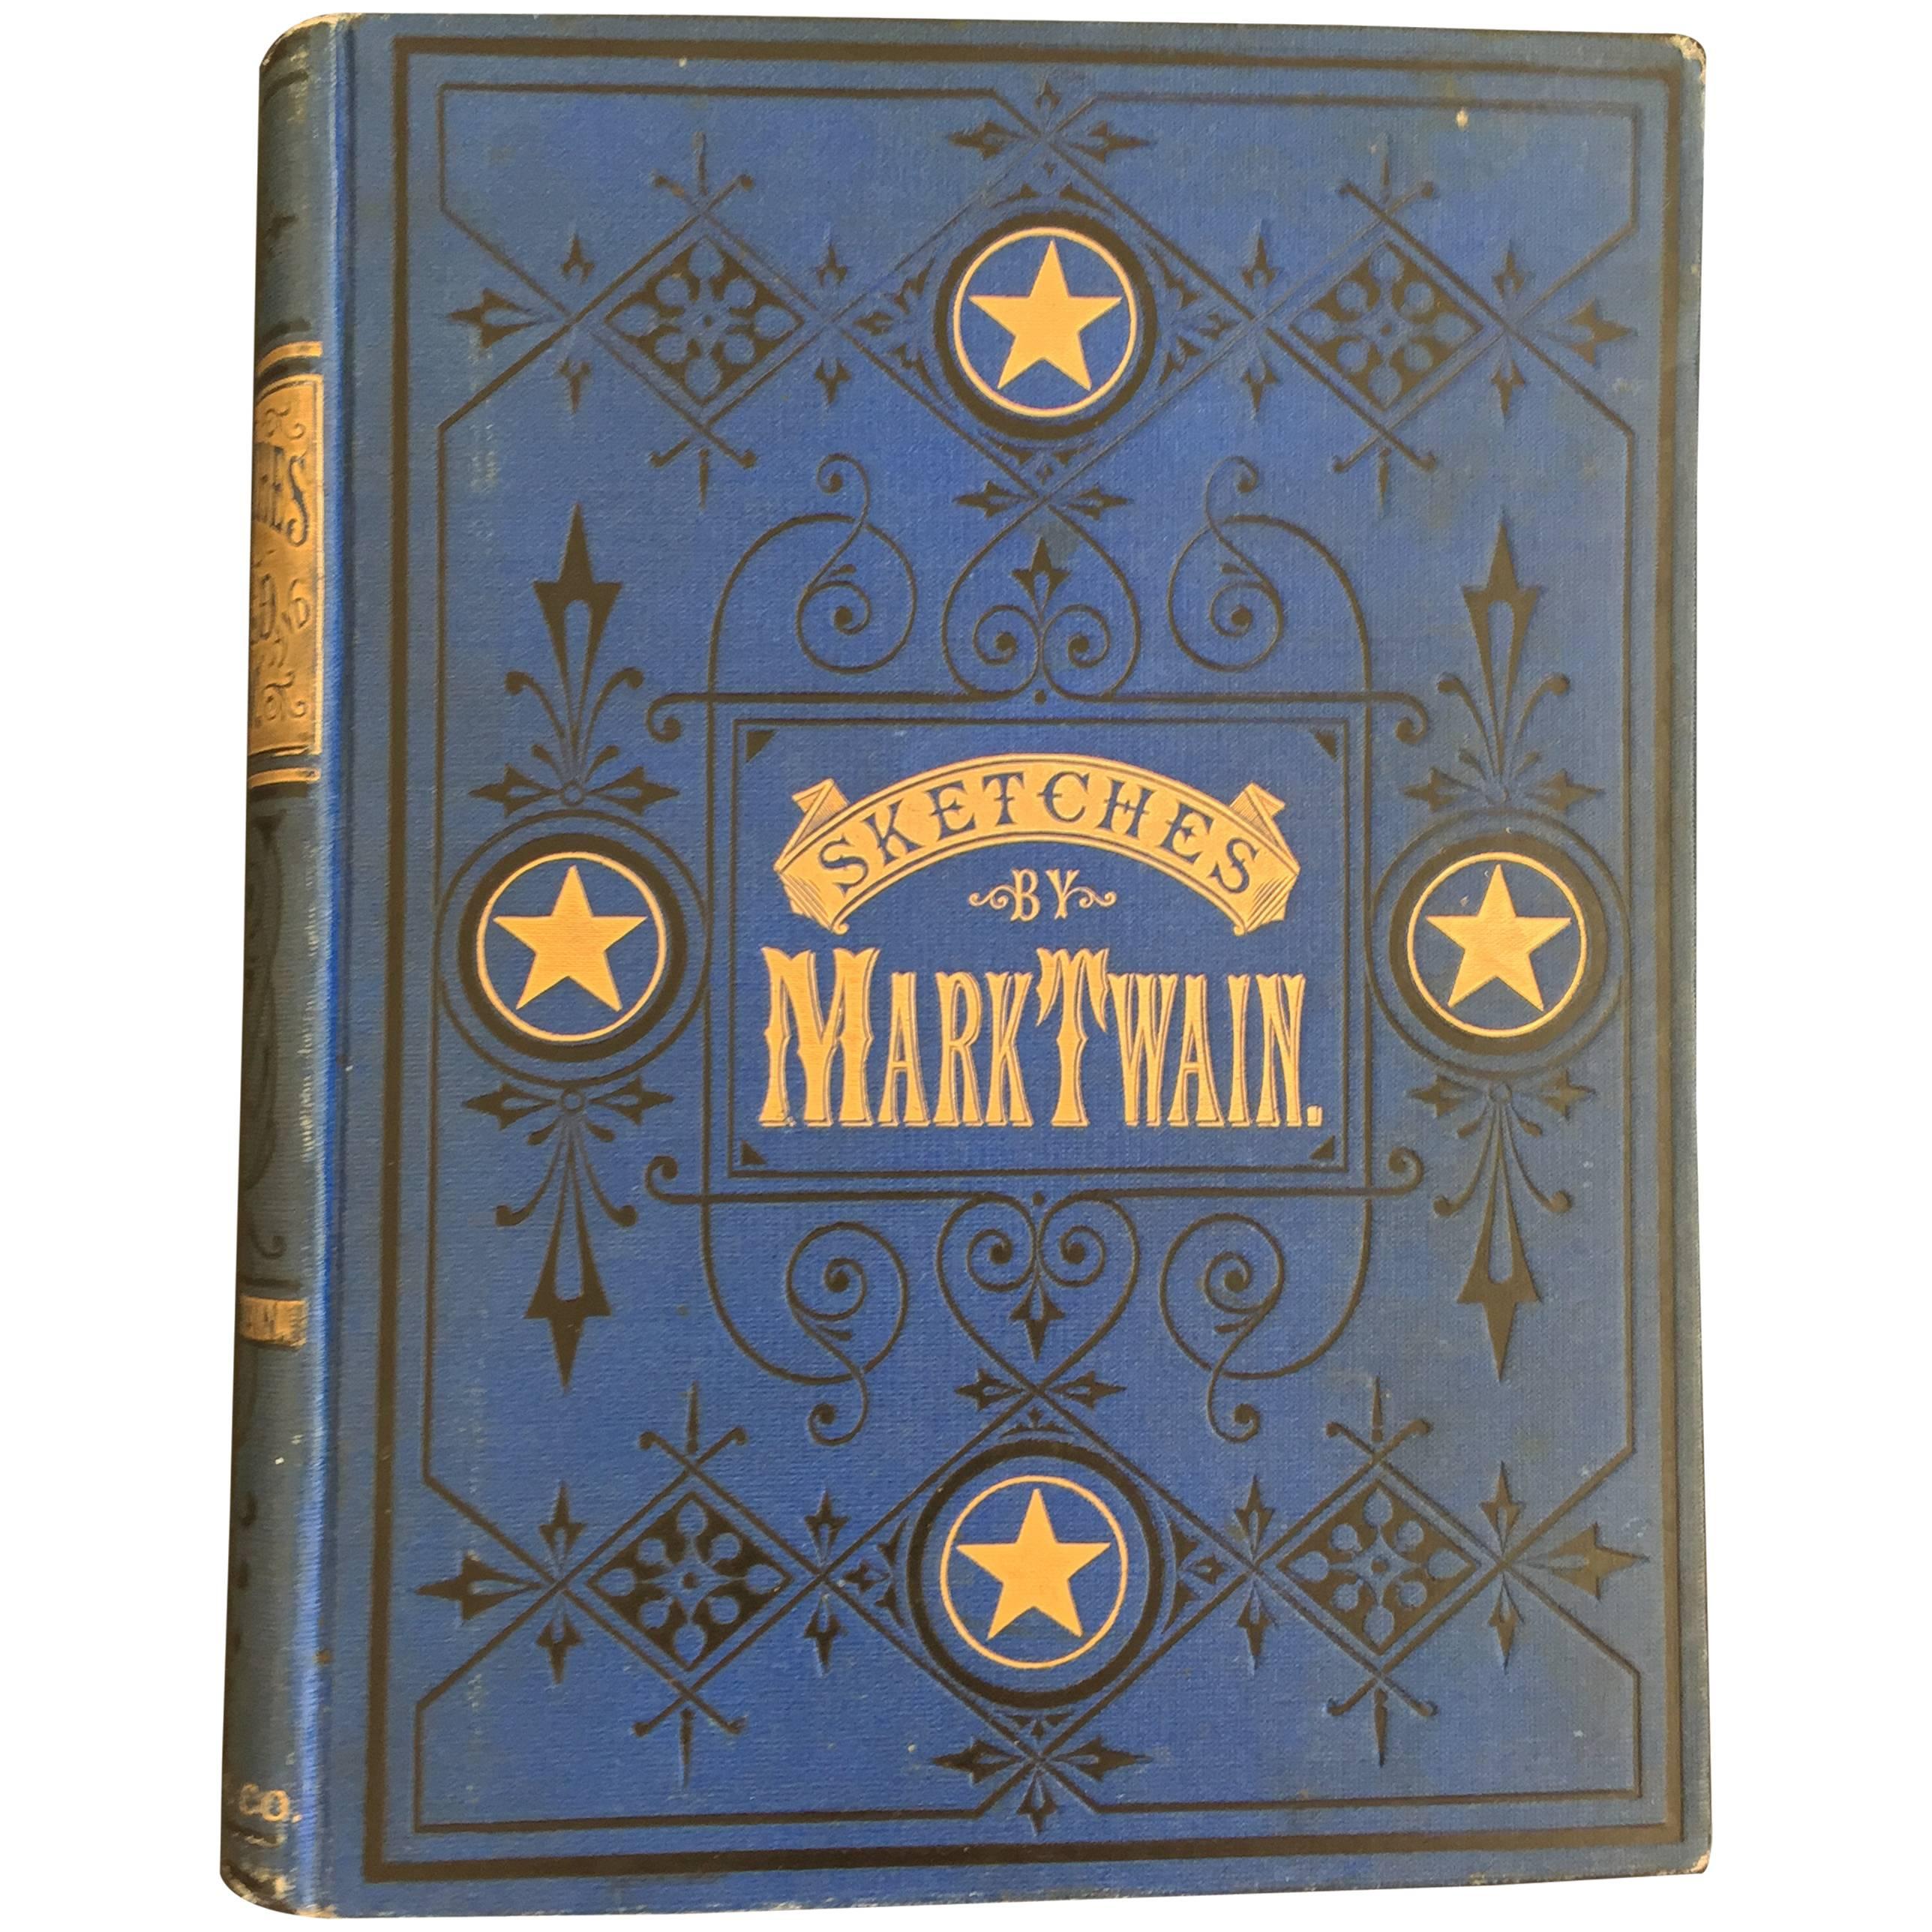 Mark Twain's Sketches, New and Old, First Edition, circa 1875